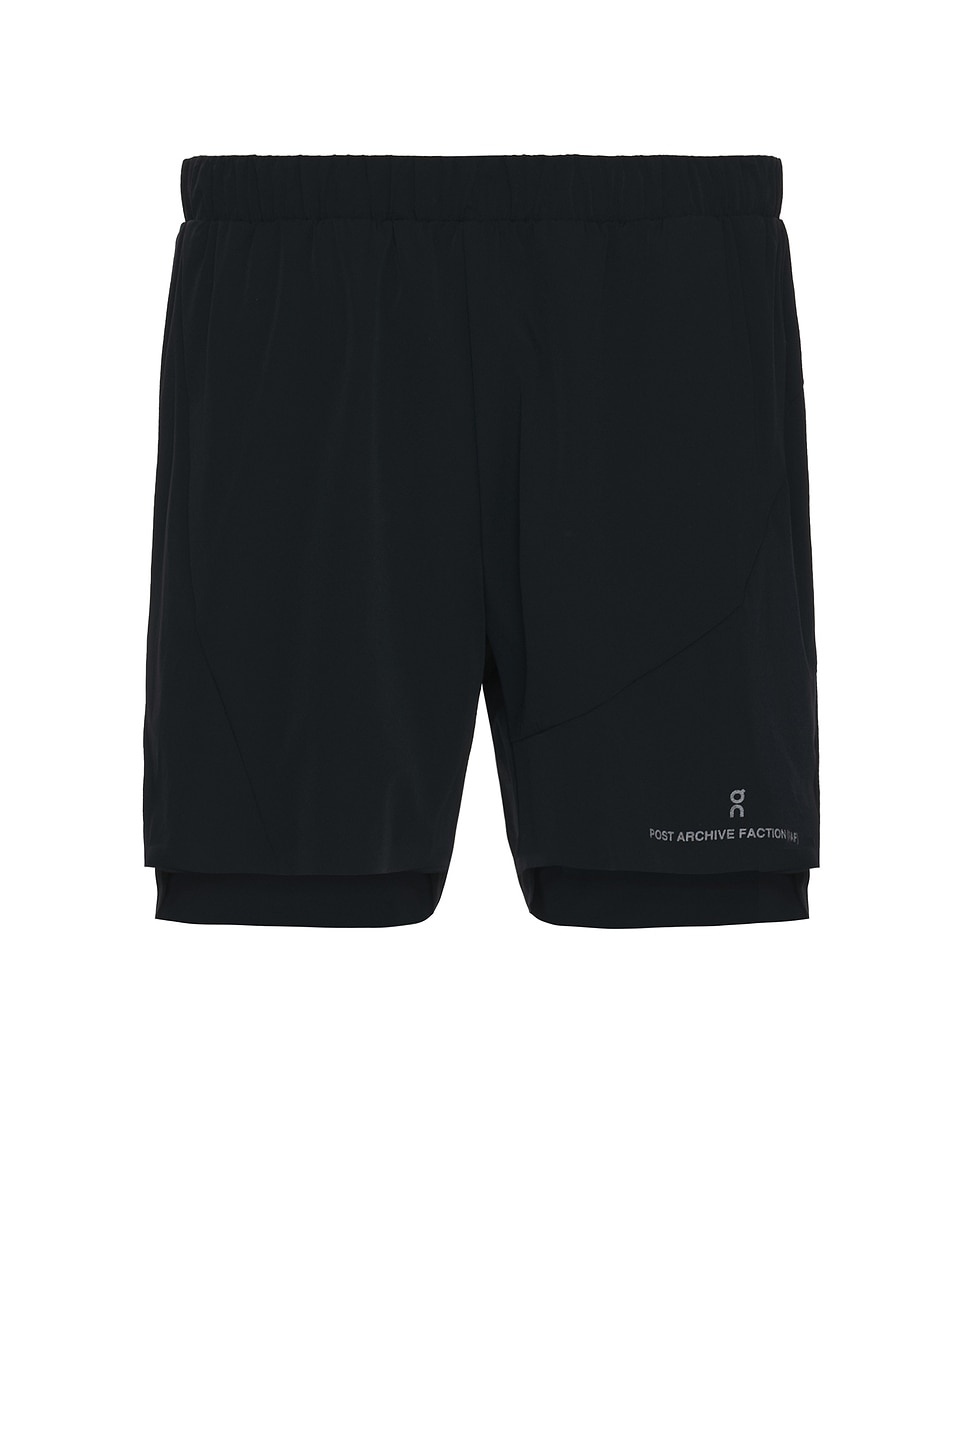 x Post Archive Faction (PAF) Shorts - 1